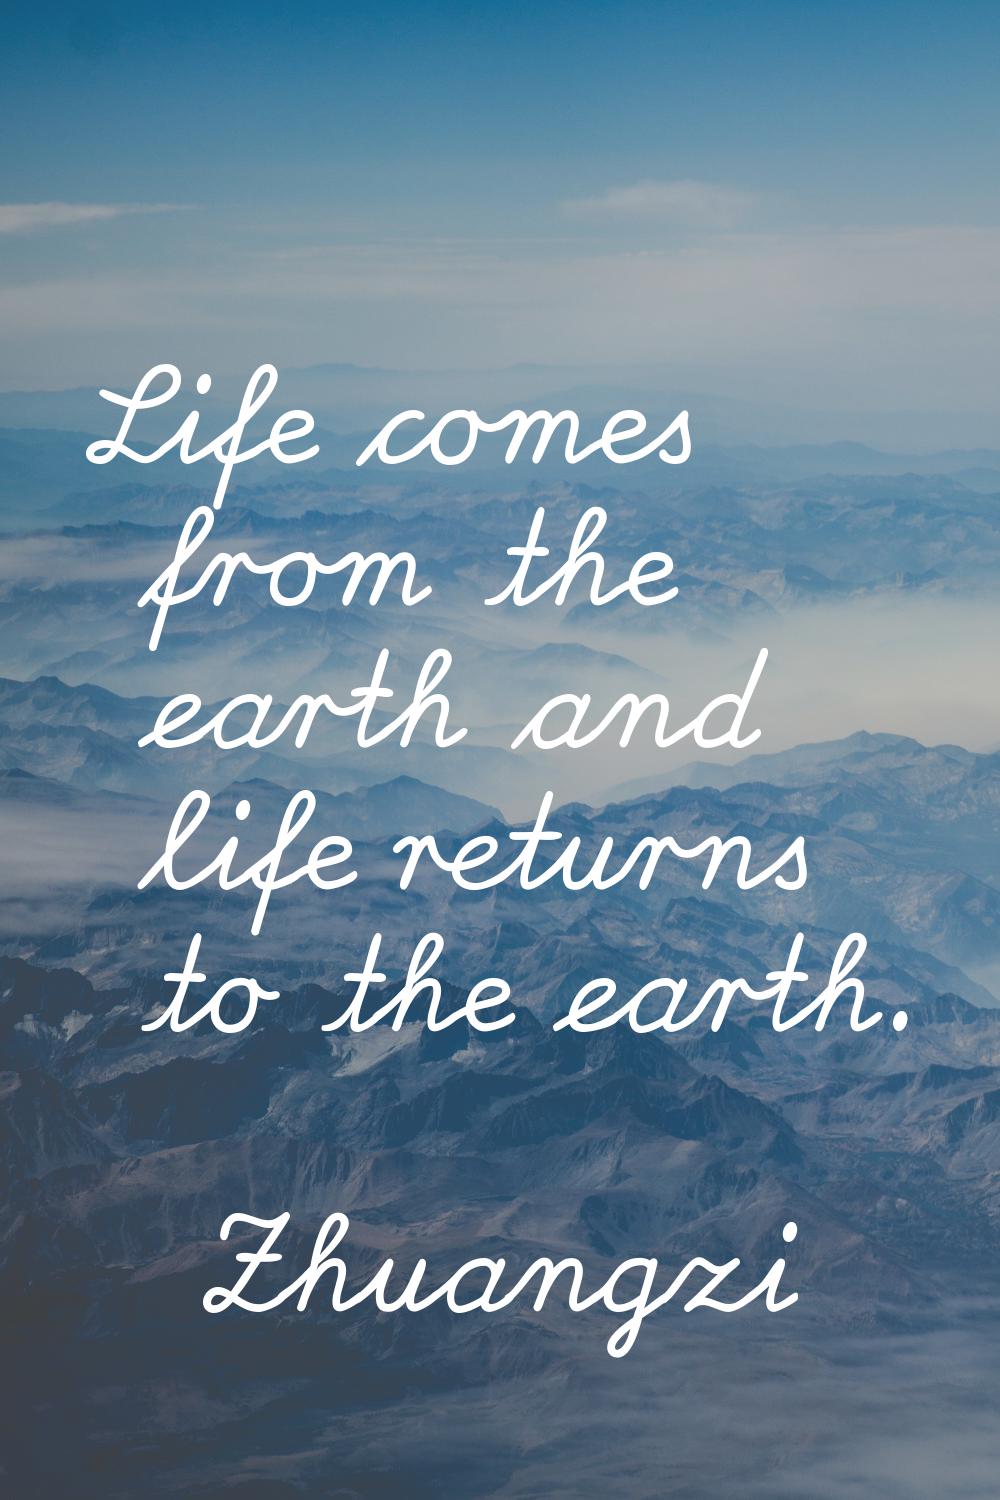 Life comes from the earth and life returns to the earth.